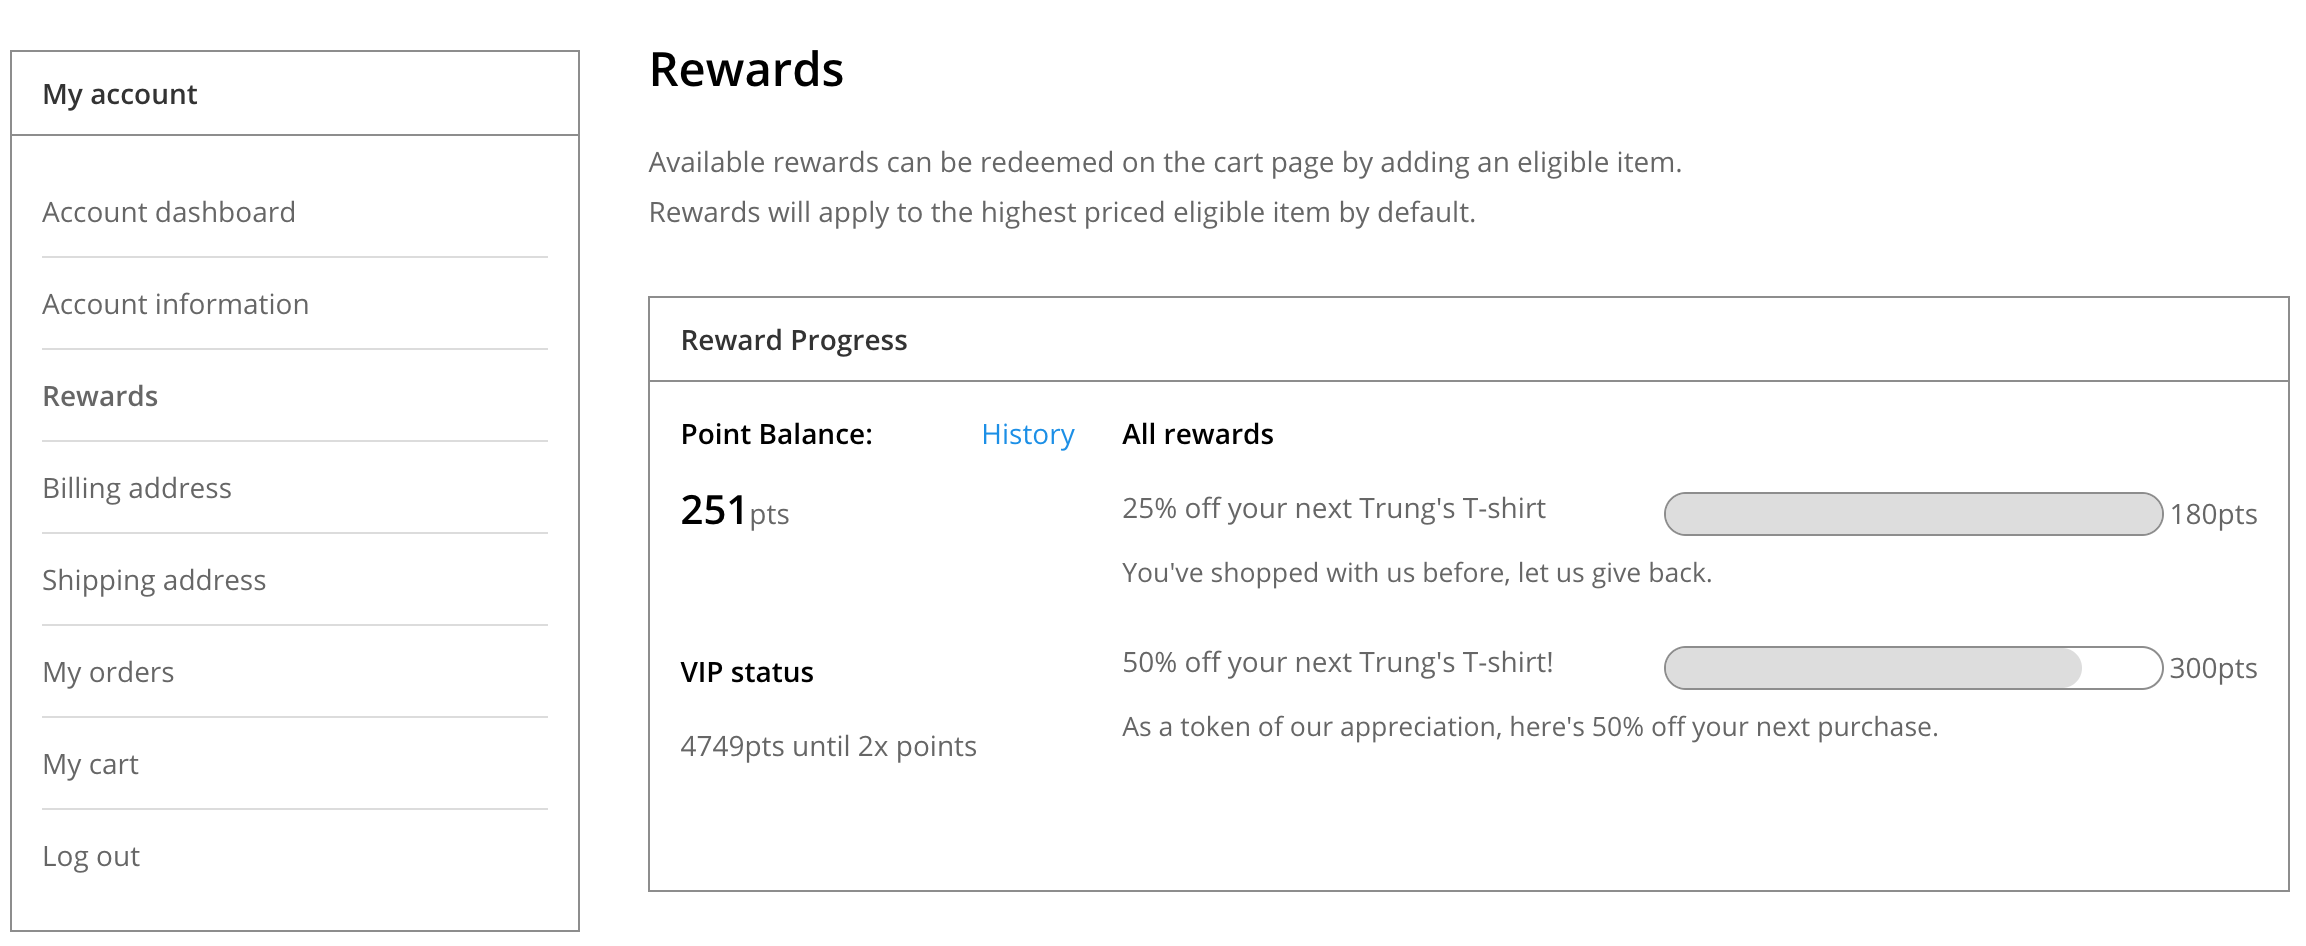 Shows the rewards page from the customer account screen. The customer has earned one reward and has almost earned a second one.